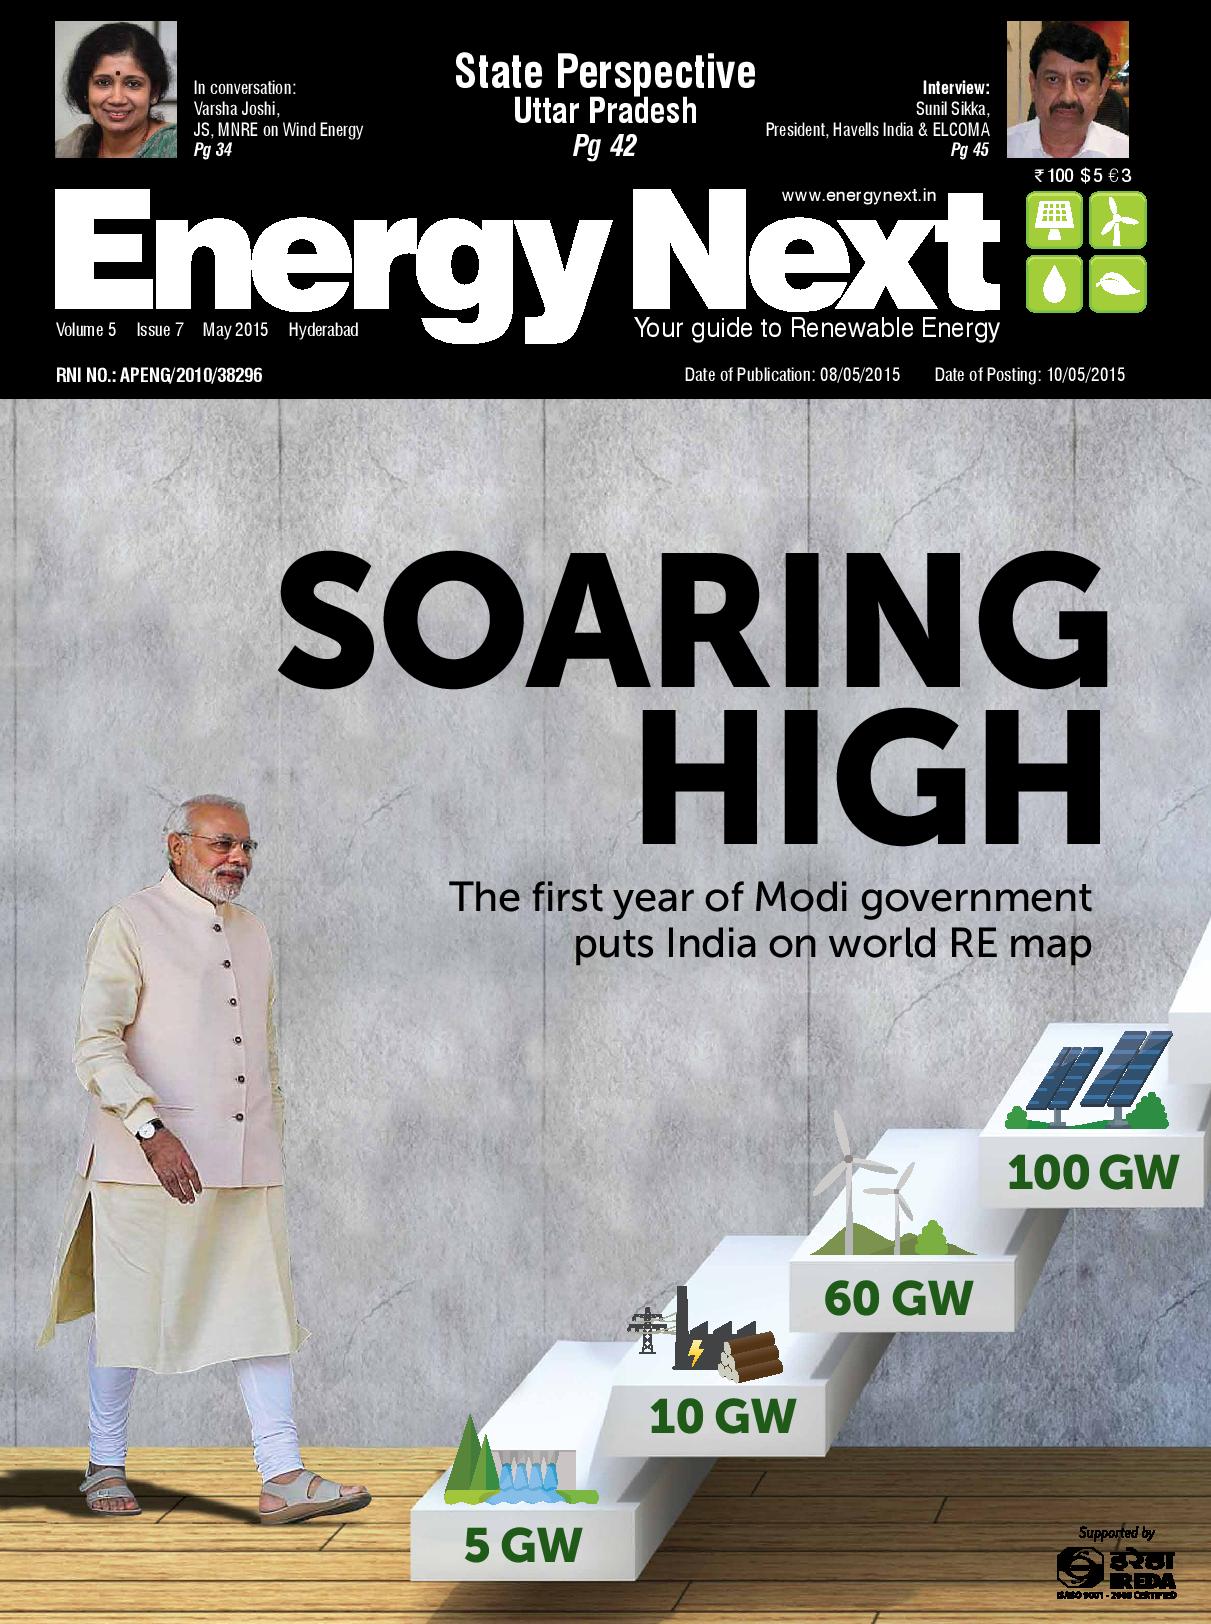 EnergyNext Vol 05 issue 7 may 2015